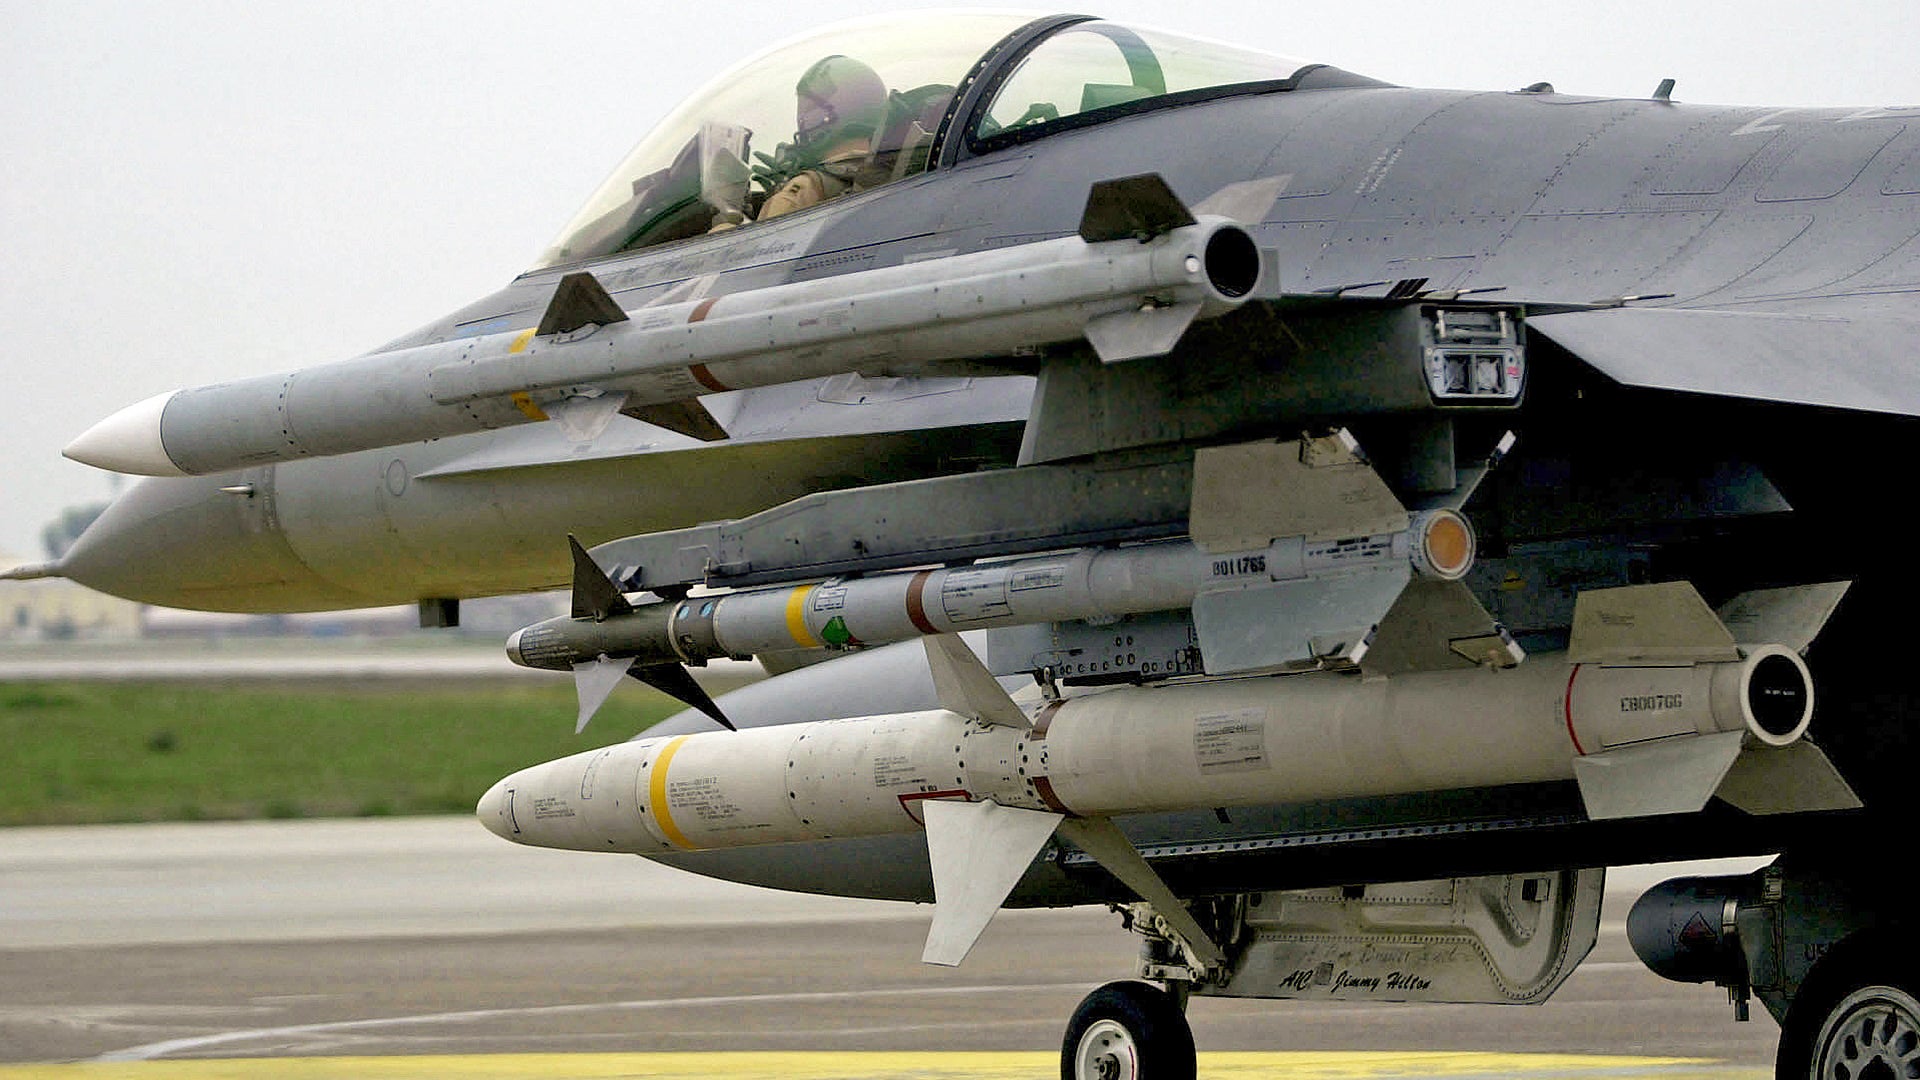 The Definitive Answer On Why F-16s Carry AIM-120 AMRAAMs On Their Wingtip Rails